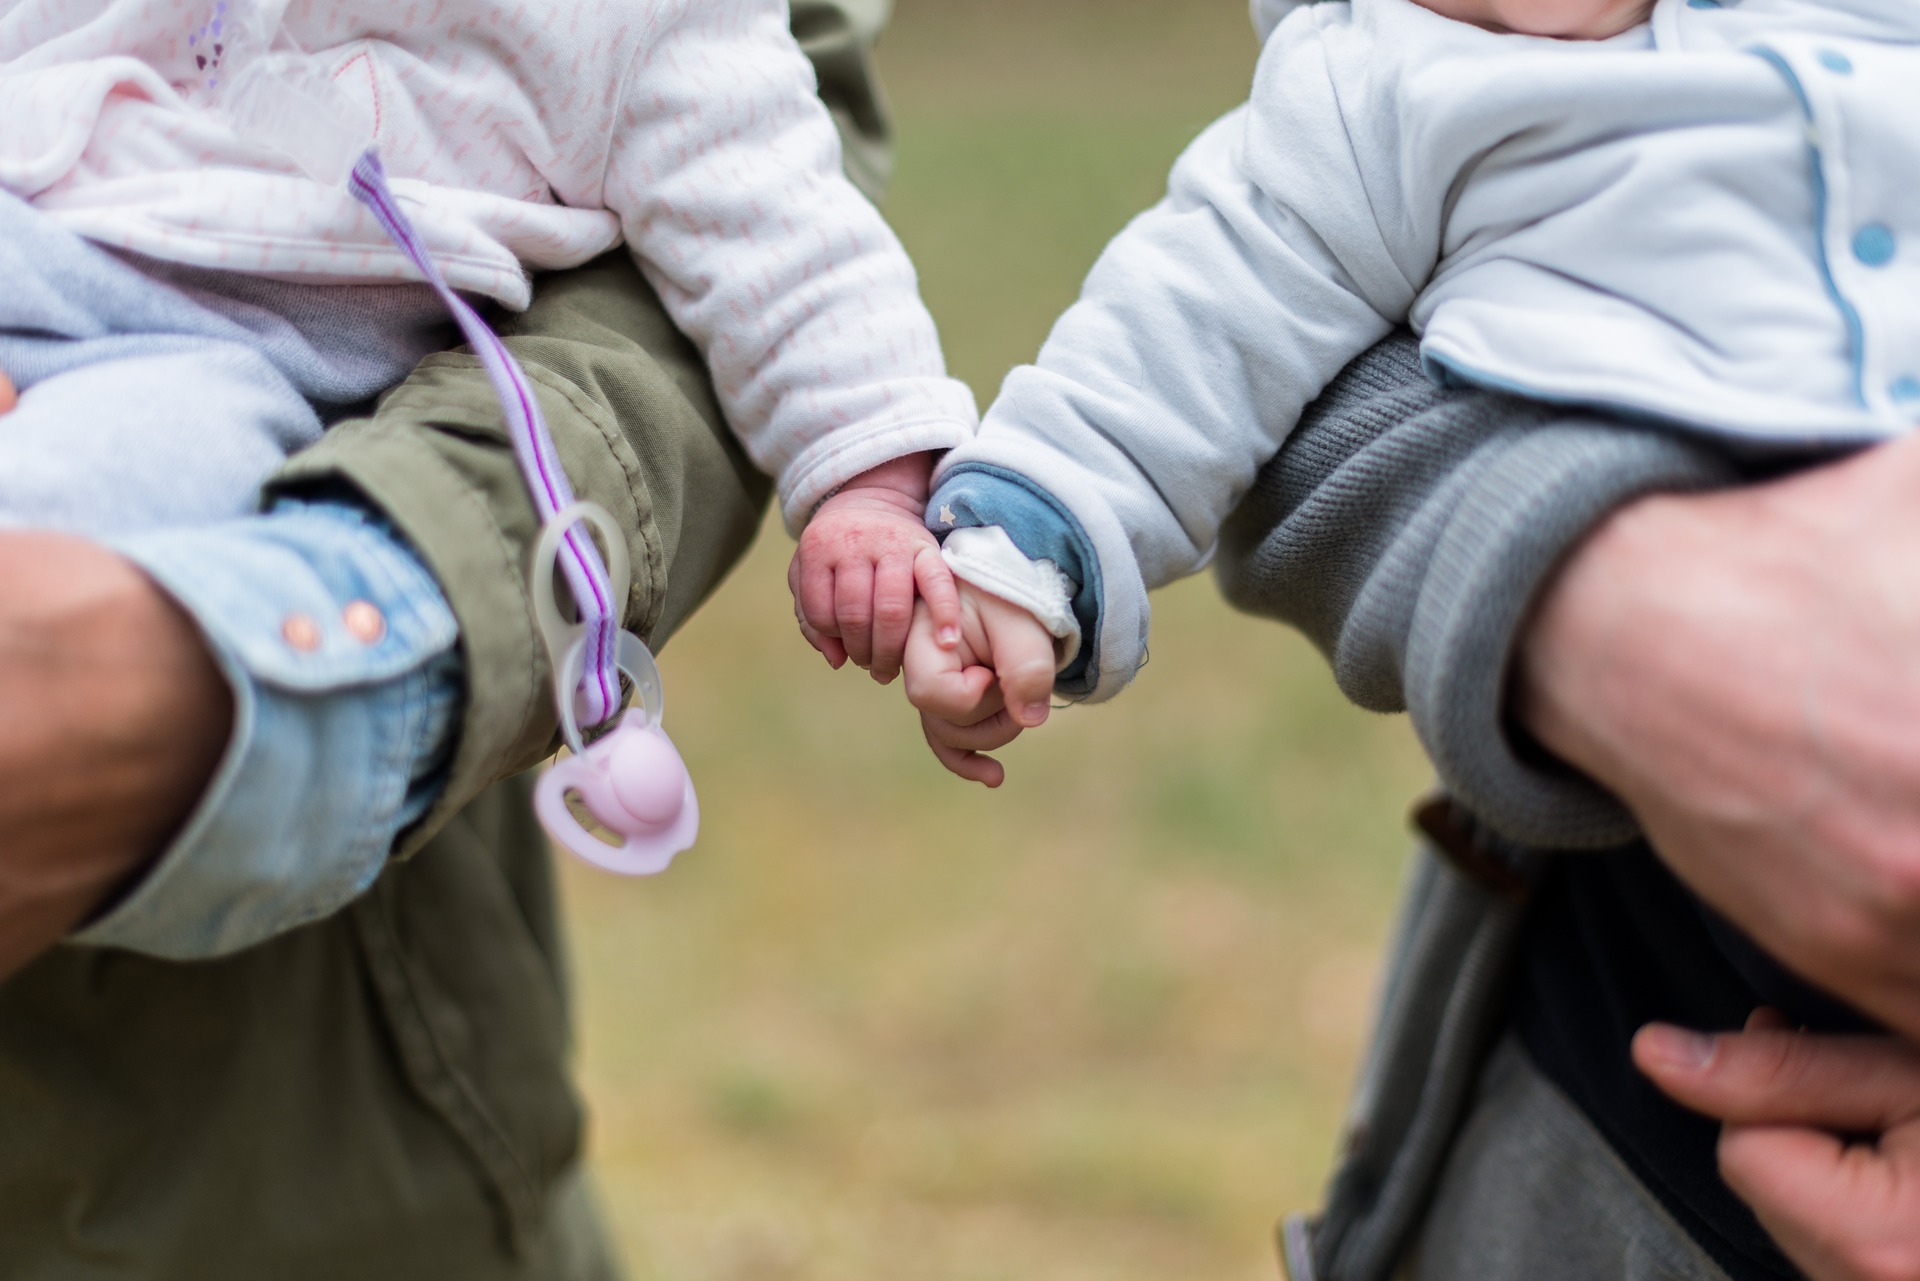 Five Tips for Meeting Other Mums and Making New Friends